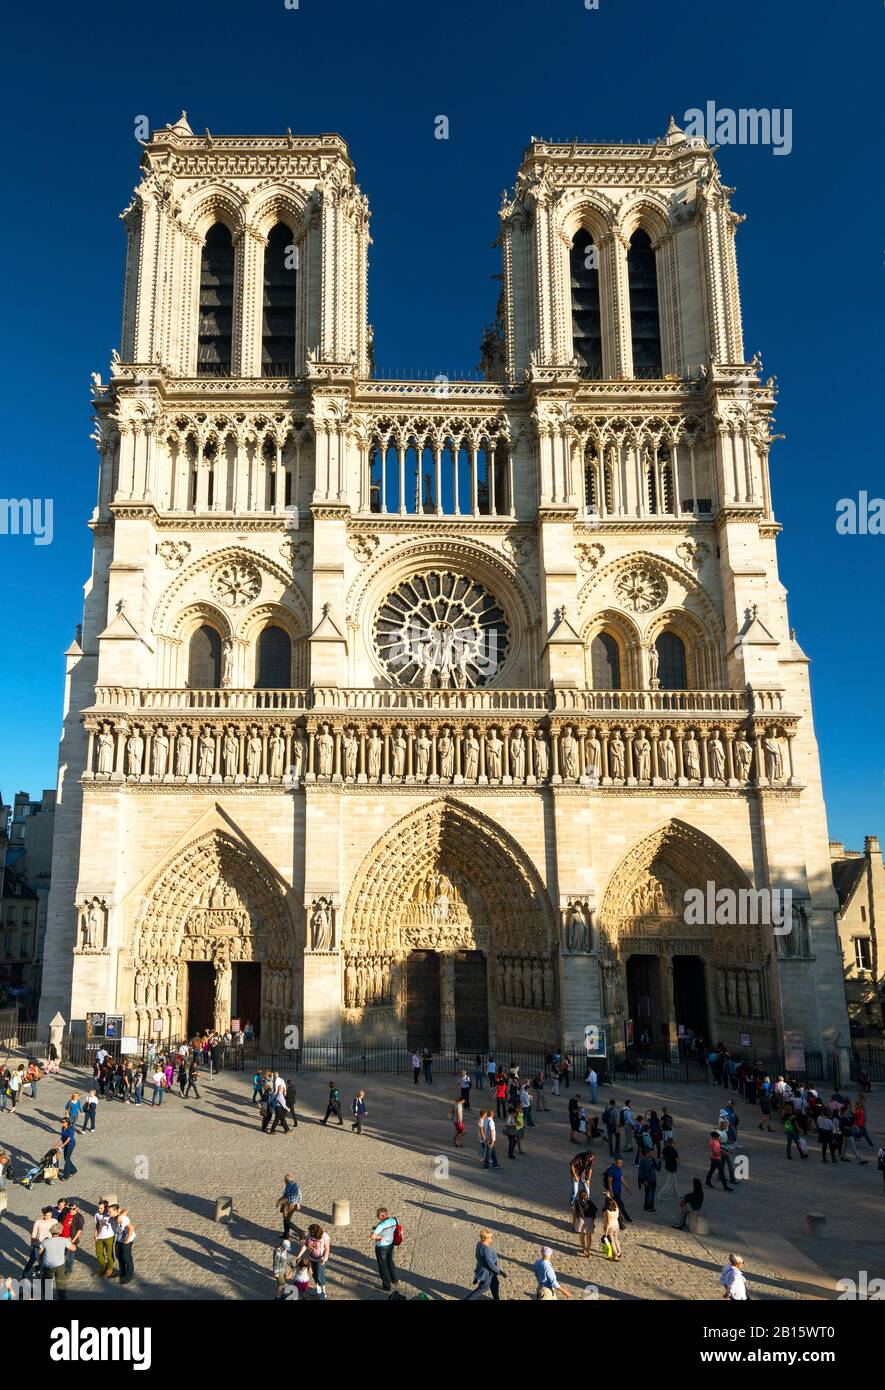 PARIS - SEPTEMBER 24: Tourists visiting the Cathedral of Notre Dame de Paris on september 24, 2013. Notre Dame is one of the top tourist destinations Stock Photo